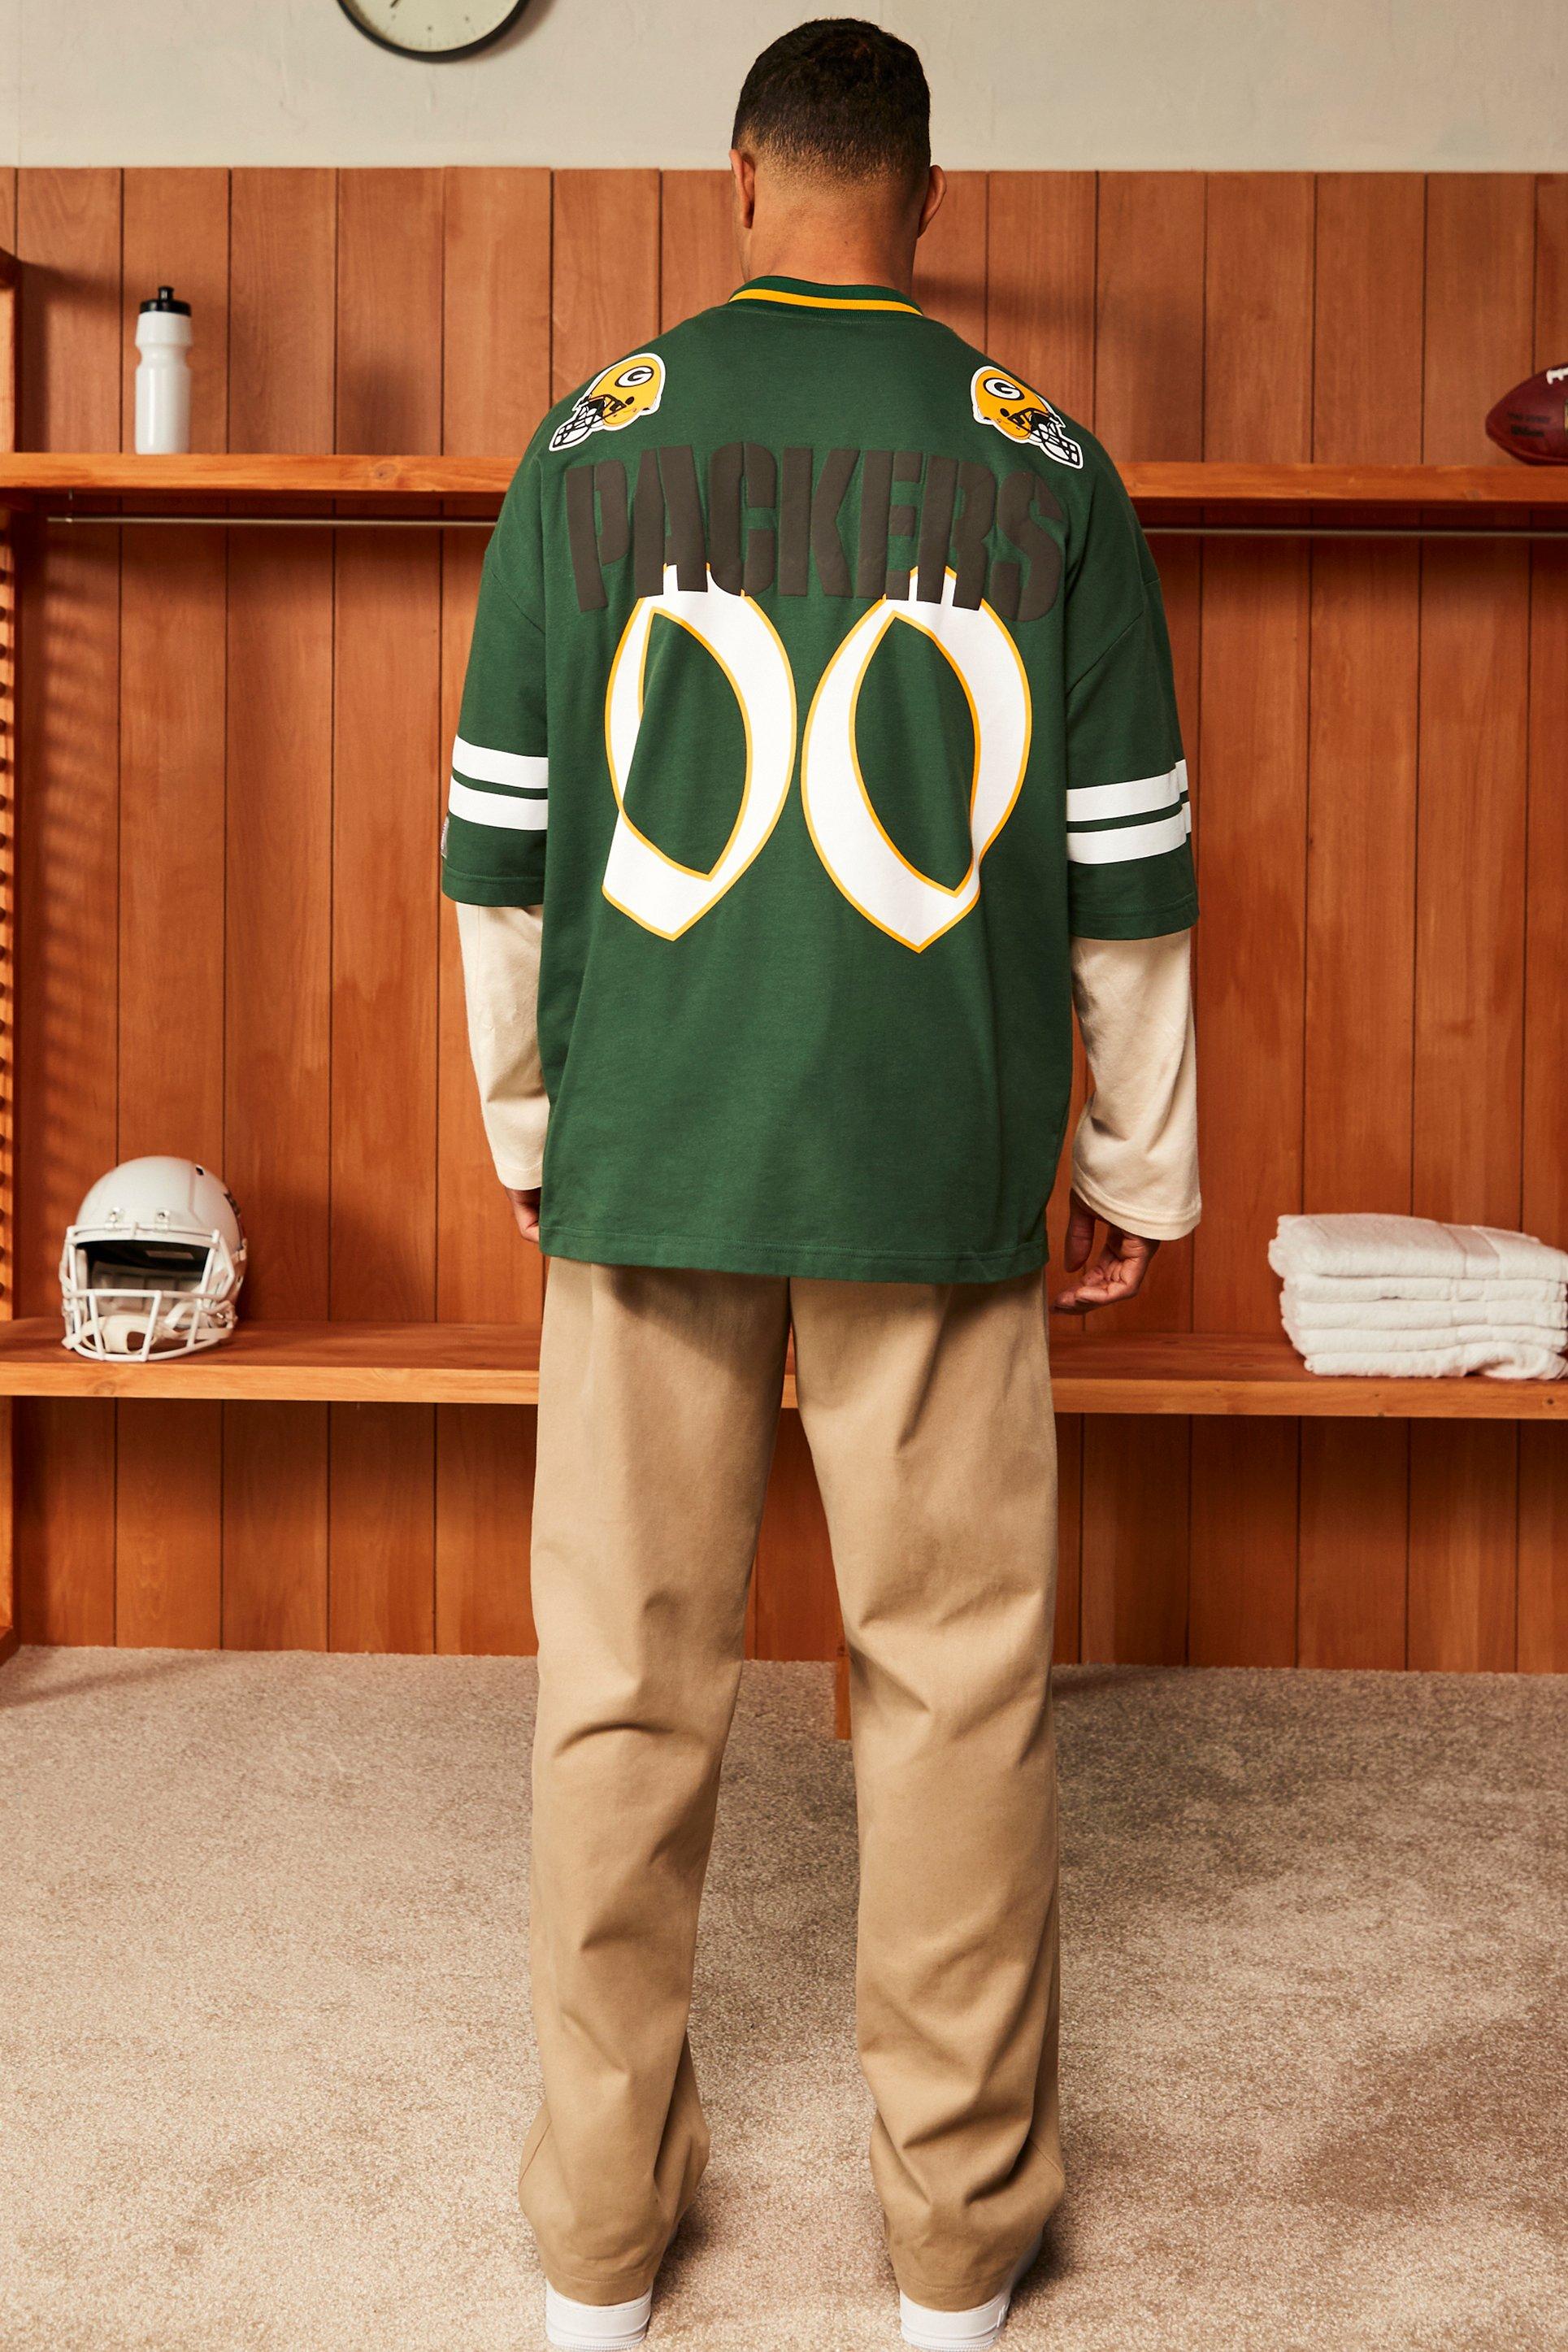 Nfl Oversized Packers Puff Print T-shirt